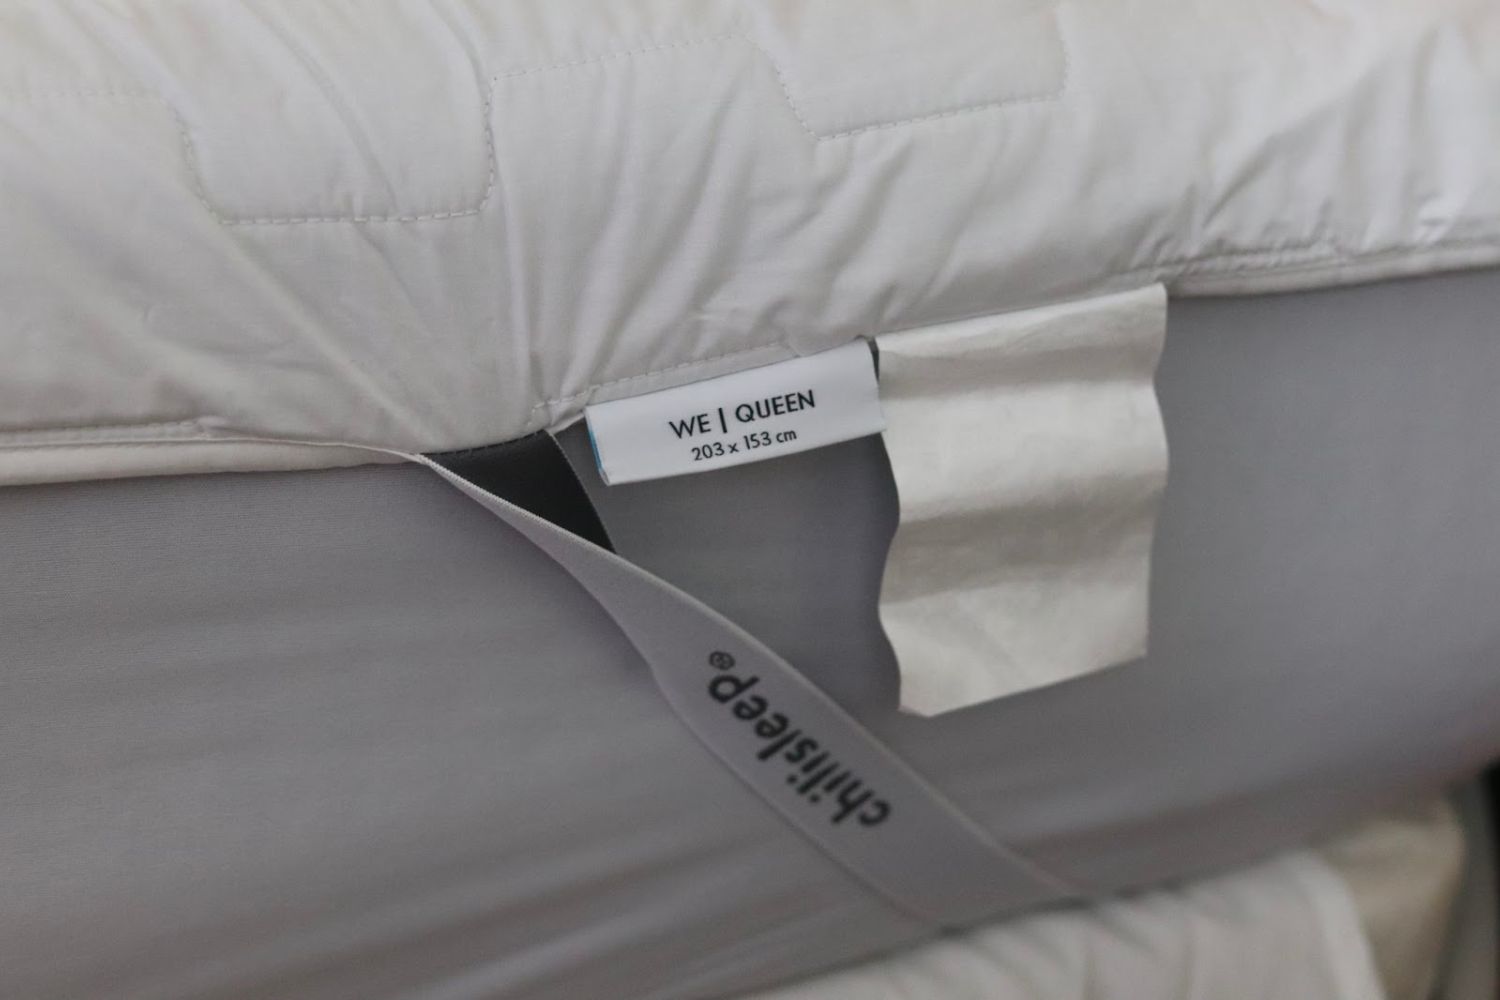 The elastic straps of the Chilipad Sleep System looped around a mattress and holding the system in place.